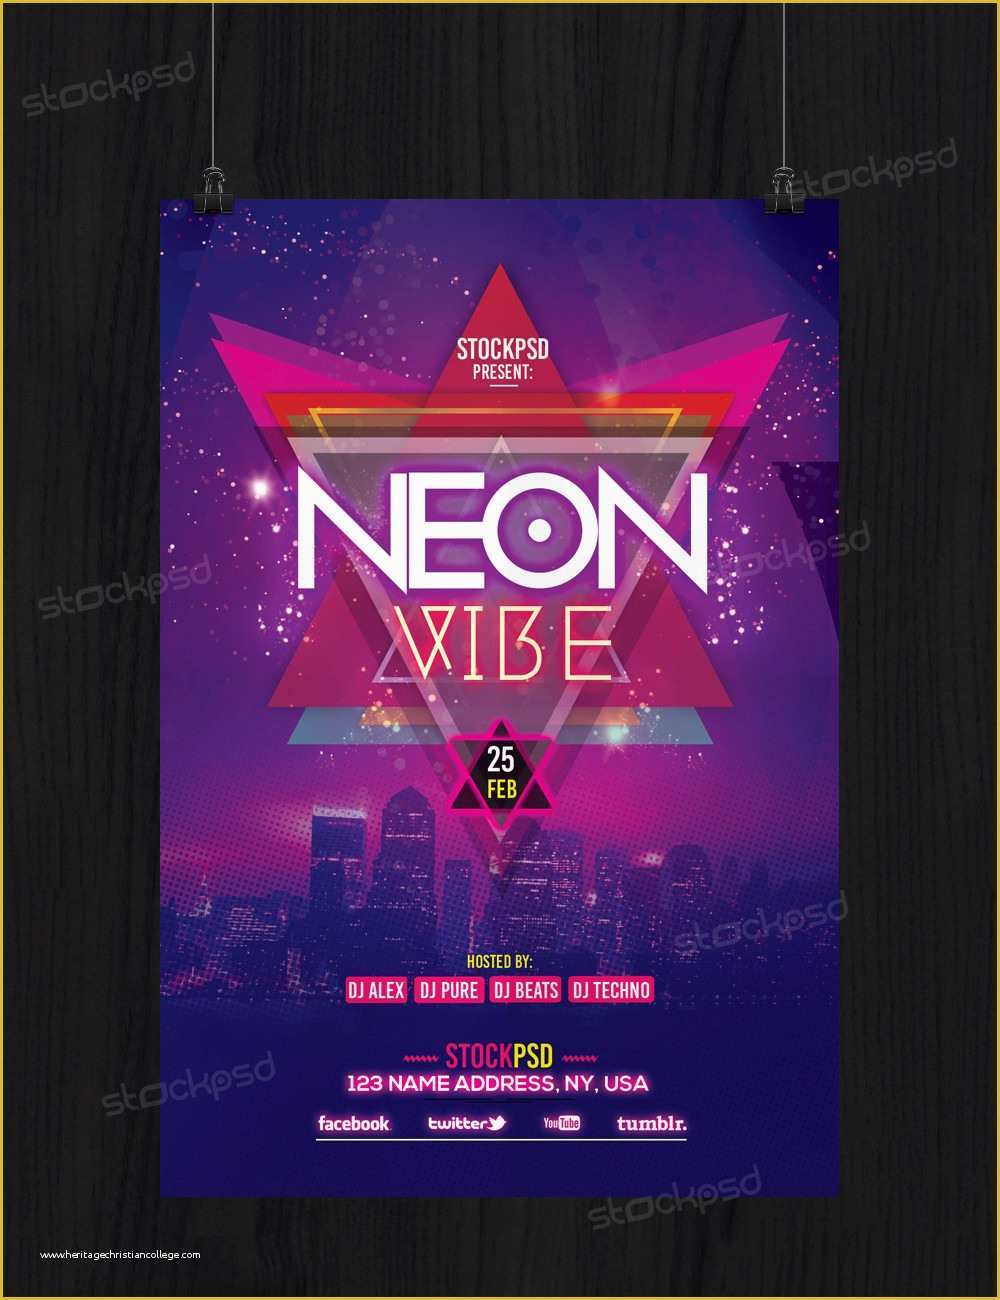 Neon Party Flyer Template Free Of Neon Vibe Download Free Psd Flyer Template Free Psd